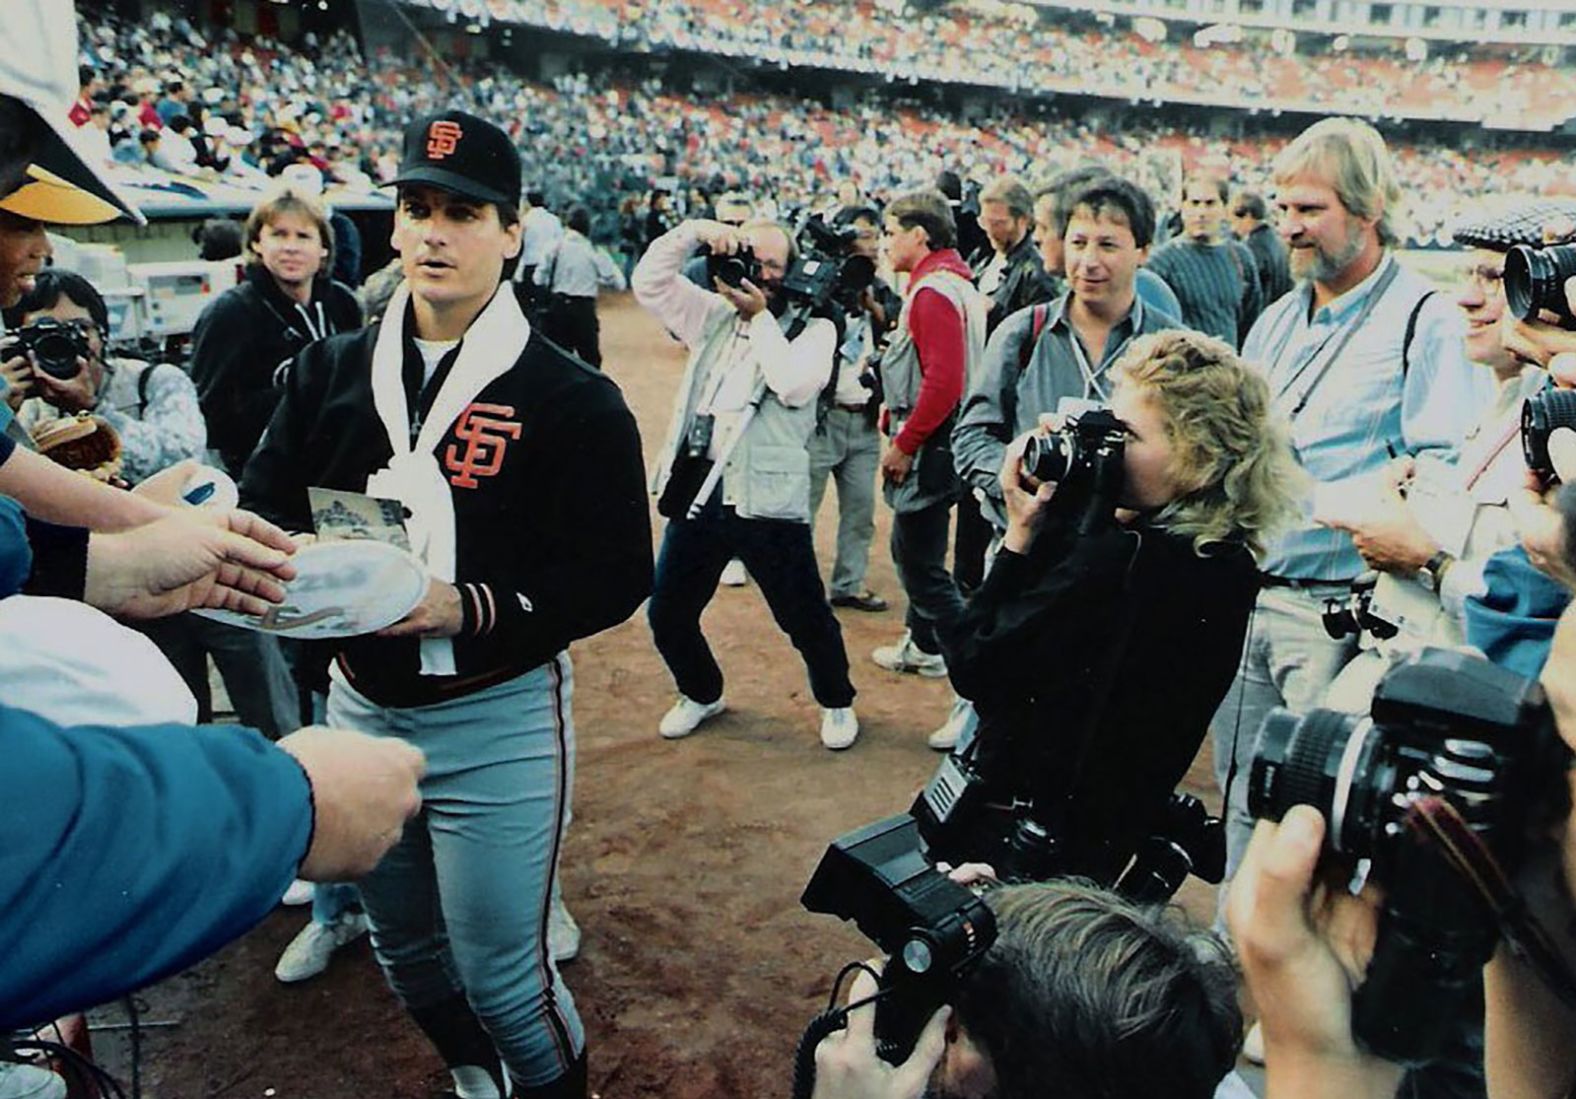 Karen T. Borchers takes a photo of San Francisco Giants pitcher Dave Dravecky during the 1989 World Series. That was the World Series that was interrupted by the Loma Prieta earthquake. Borchers was working for the San Jose Mercury News at the time, and the newspaper's coverage of the quake won a Pulitzer Prize. Borchers worked for the Mercury News from 1982 until her retirement in 2012.